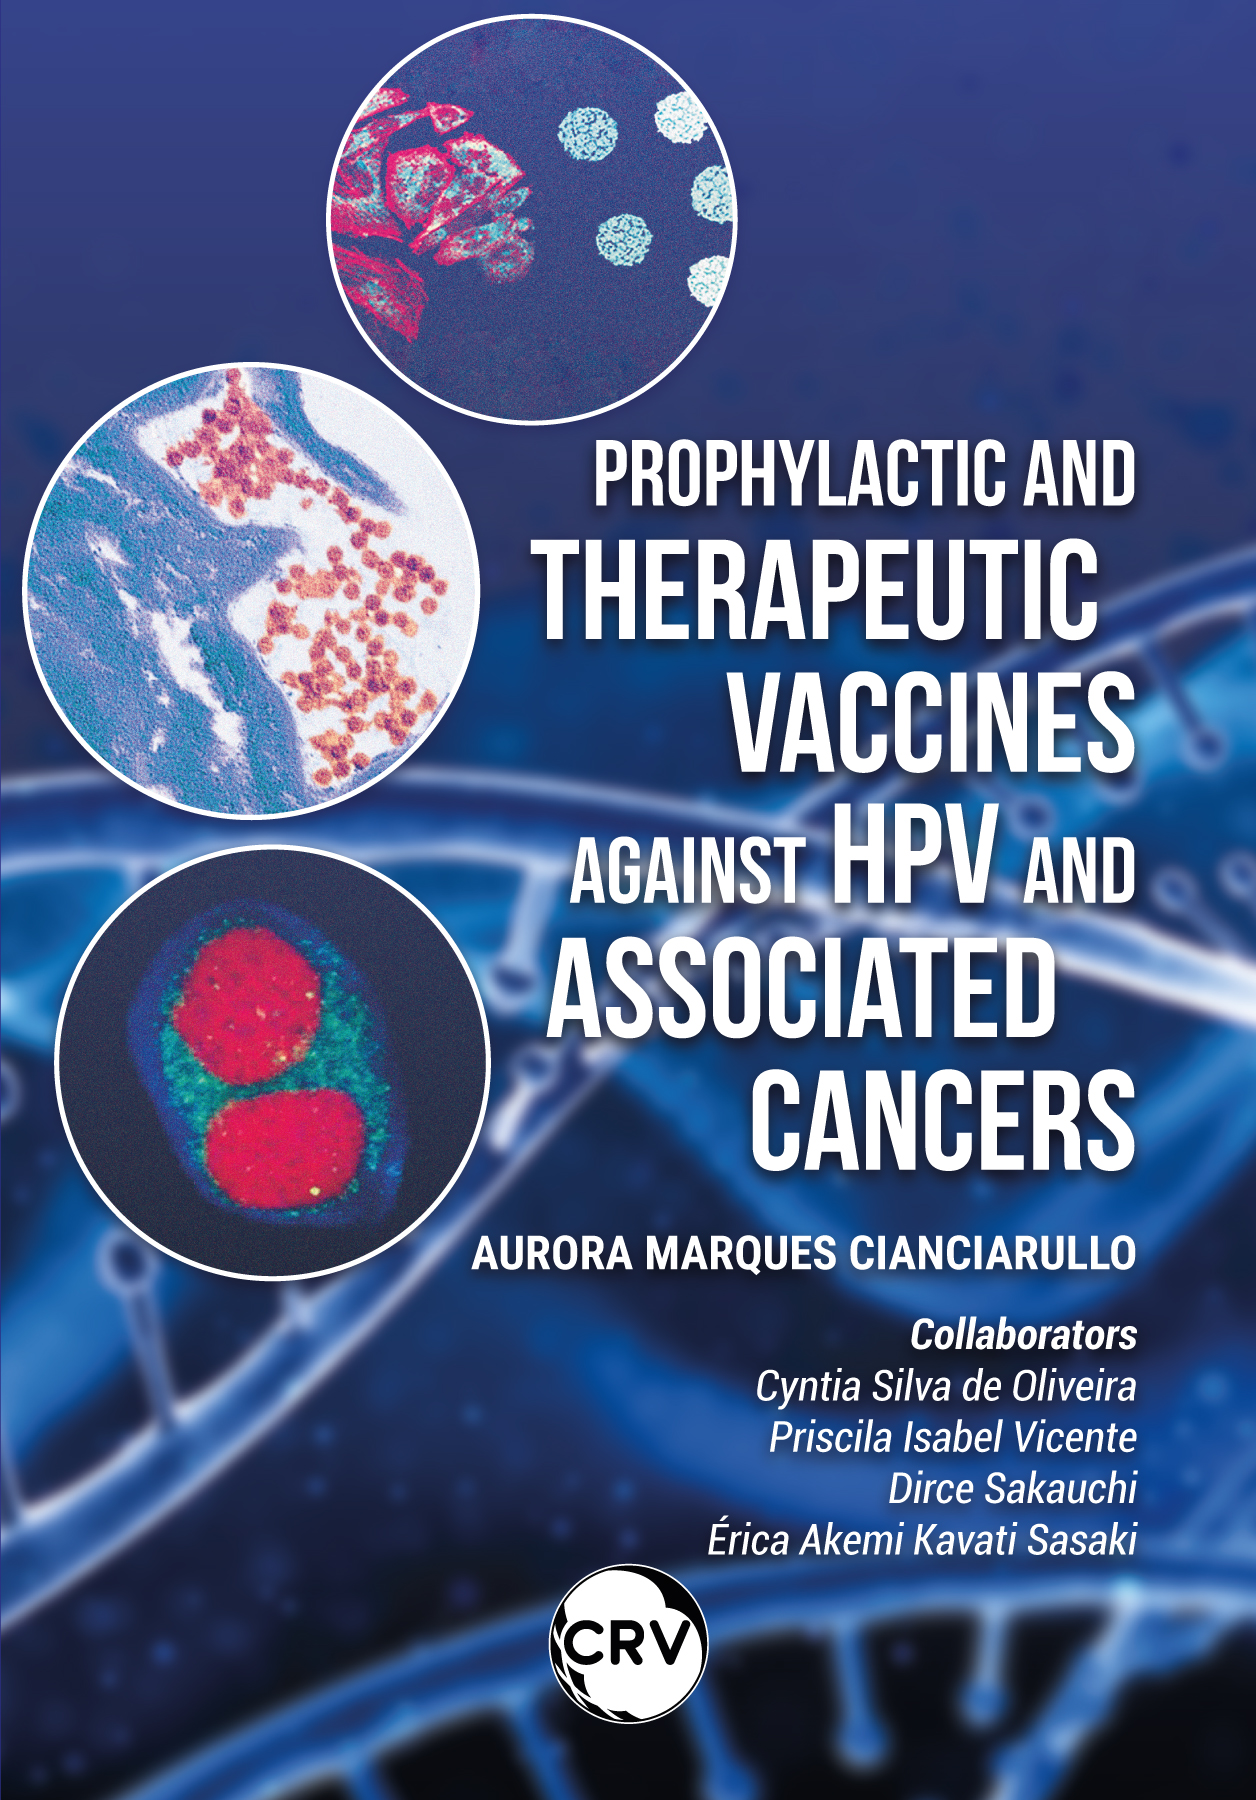 Capa do livro: Prophylactic and therapeutic vaccines against hpv and associated cancers